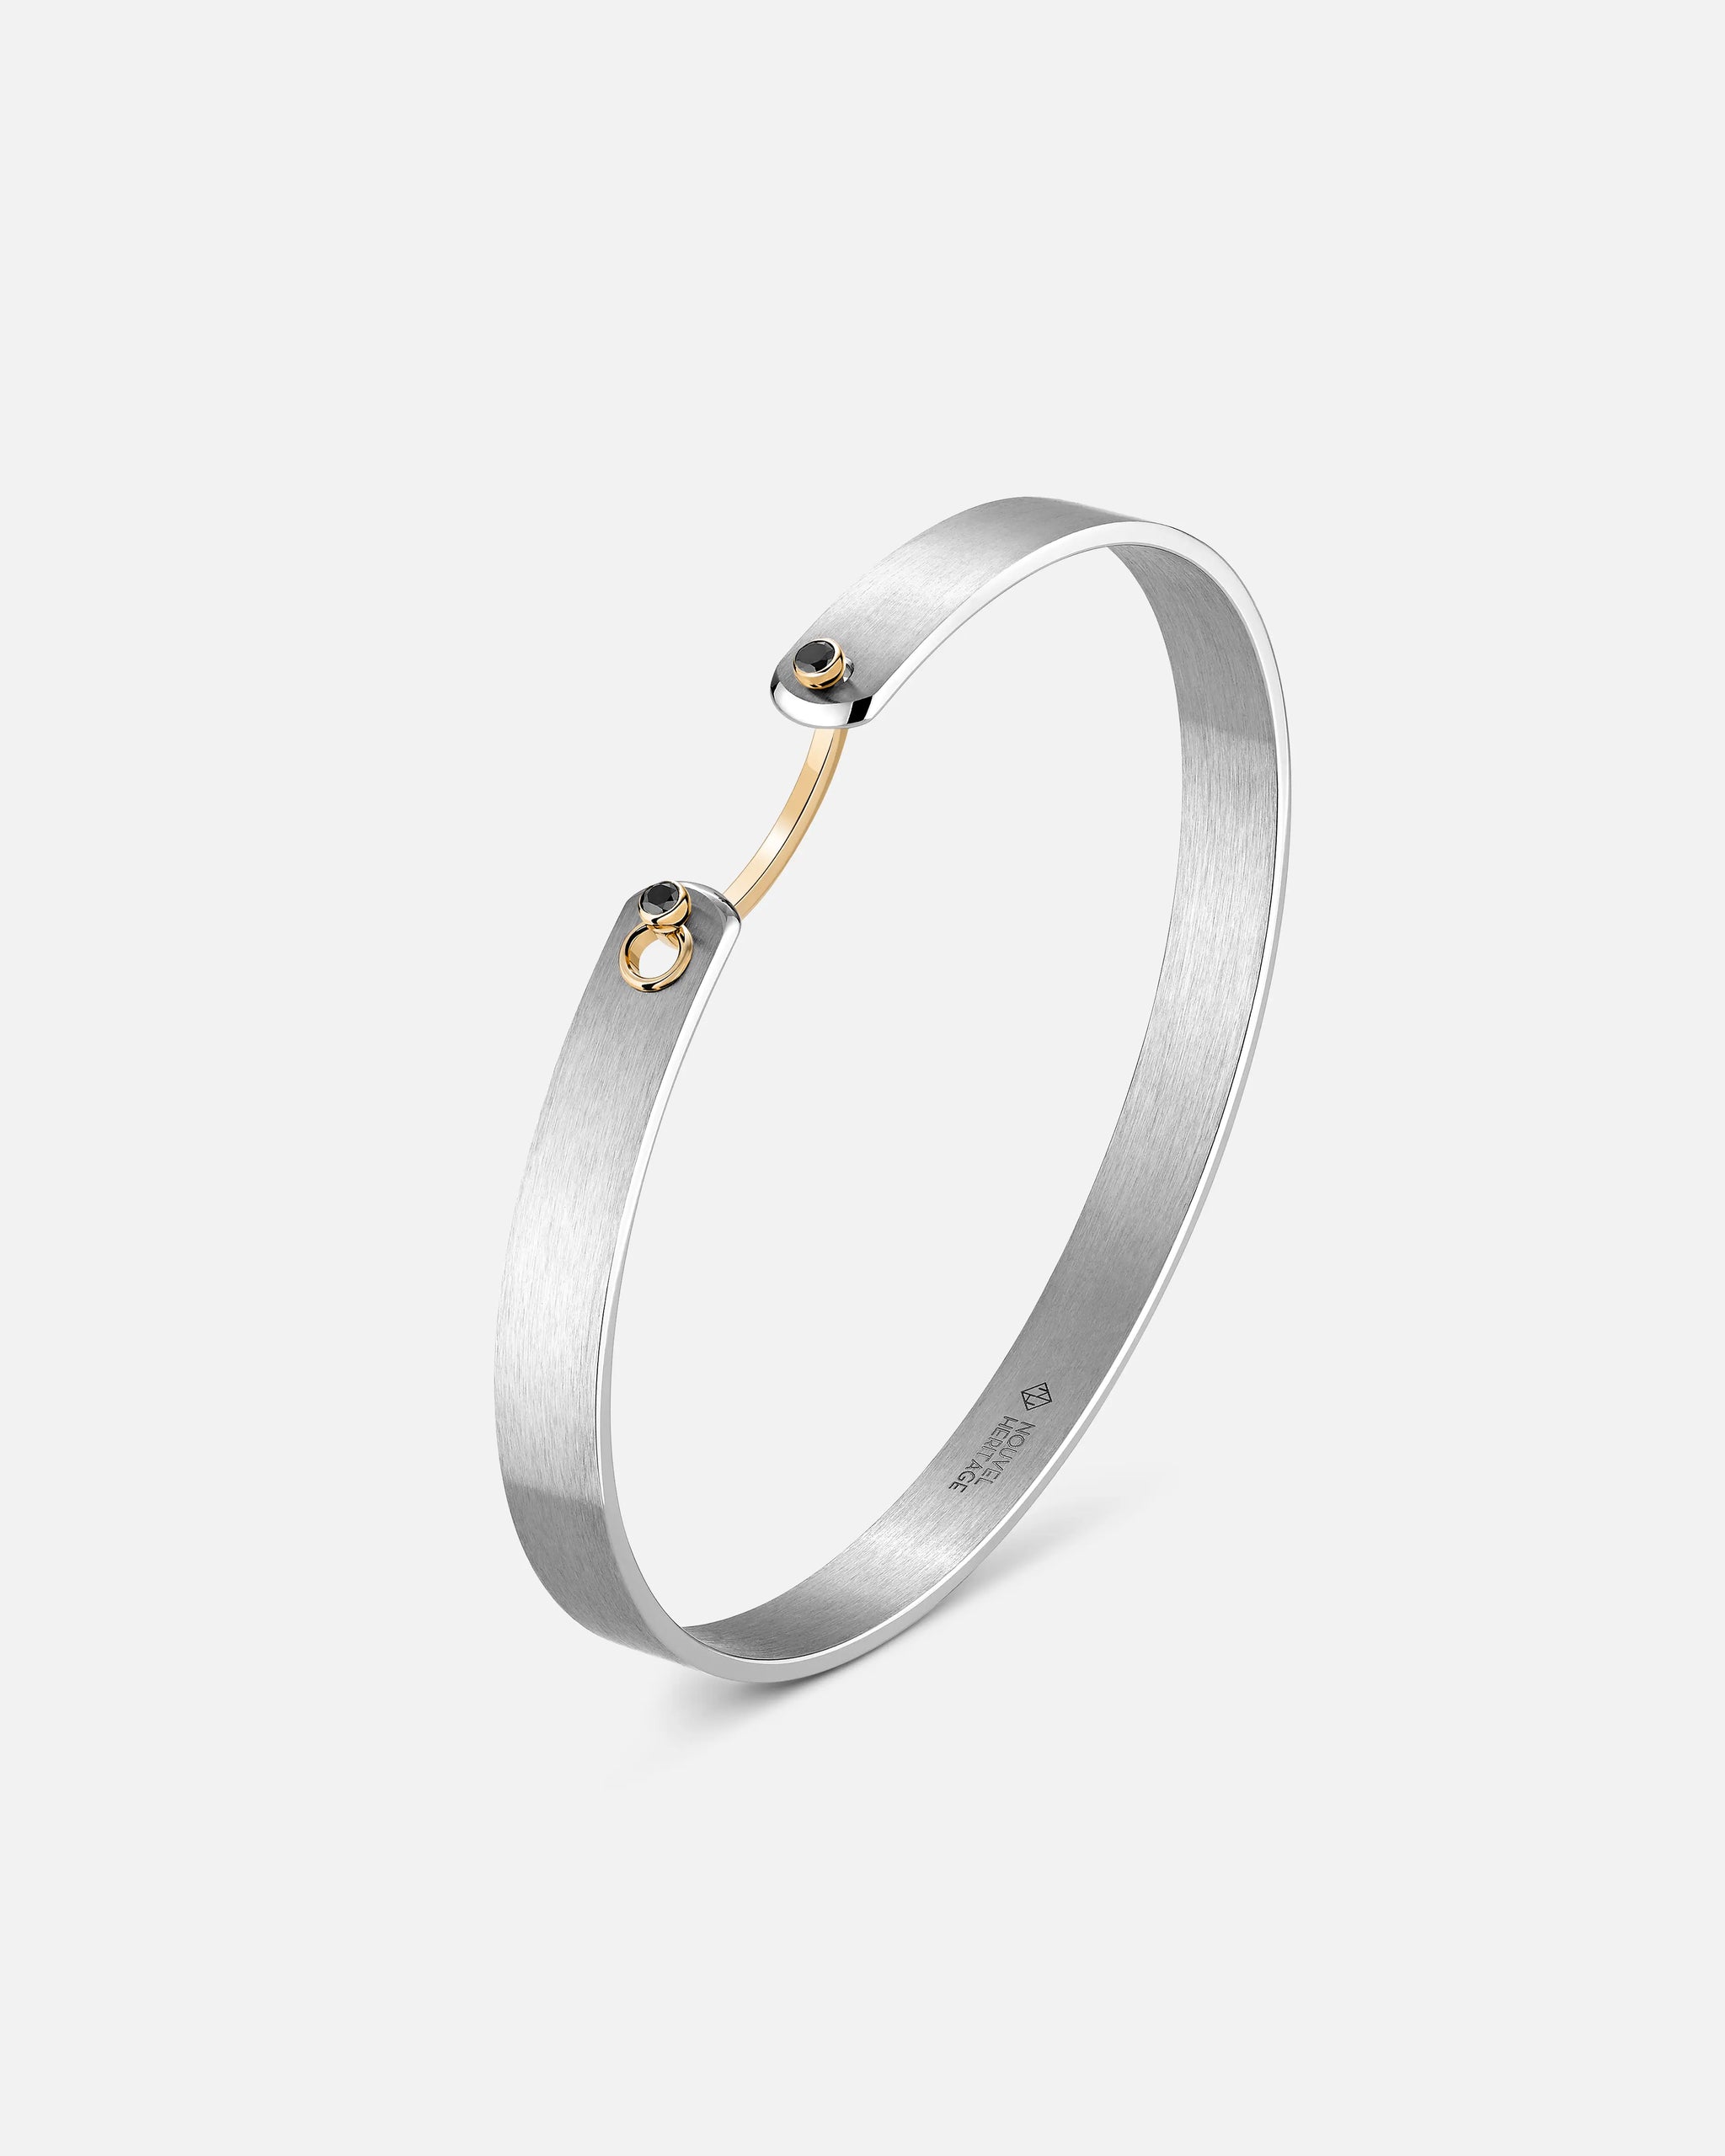 Paris From The Sky GM Mood Bangle with Black Diamonds in Yellow Gold - 1 - Nouvel Heritage